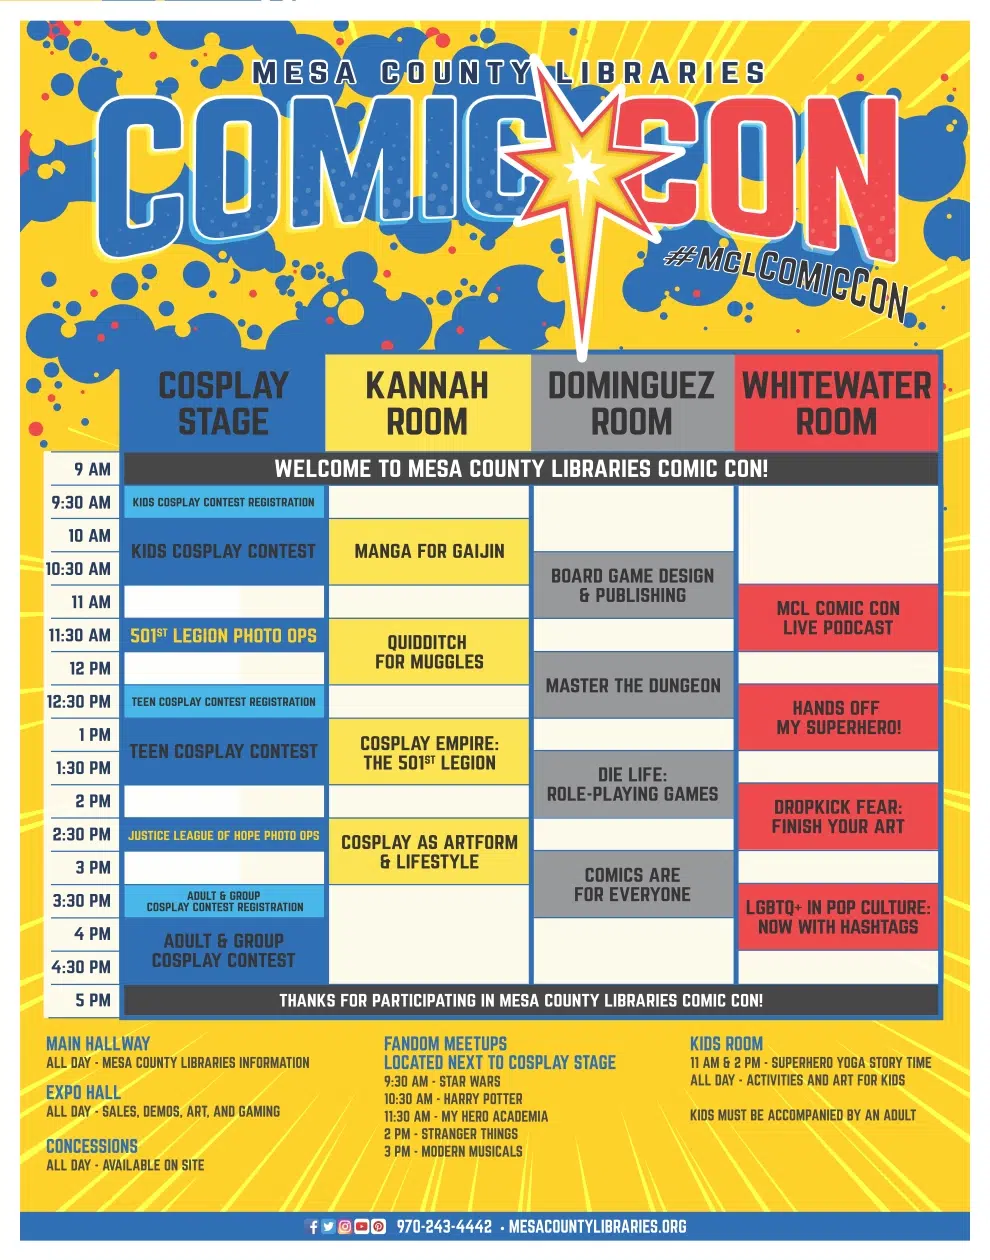 IT”S TIME!! Mesa County Libraries Comic Con.. Saturday at 2 Rivers Convention Center.. Cosplay